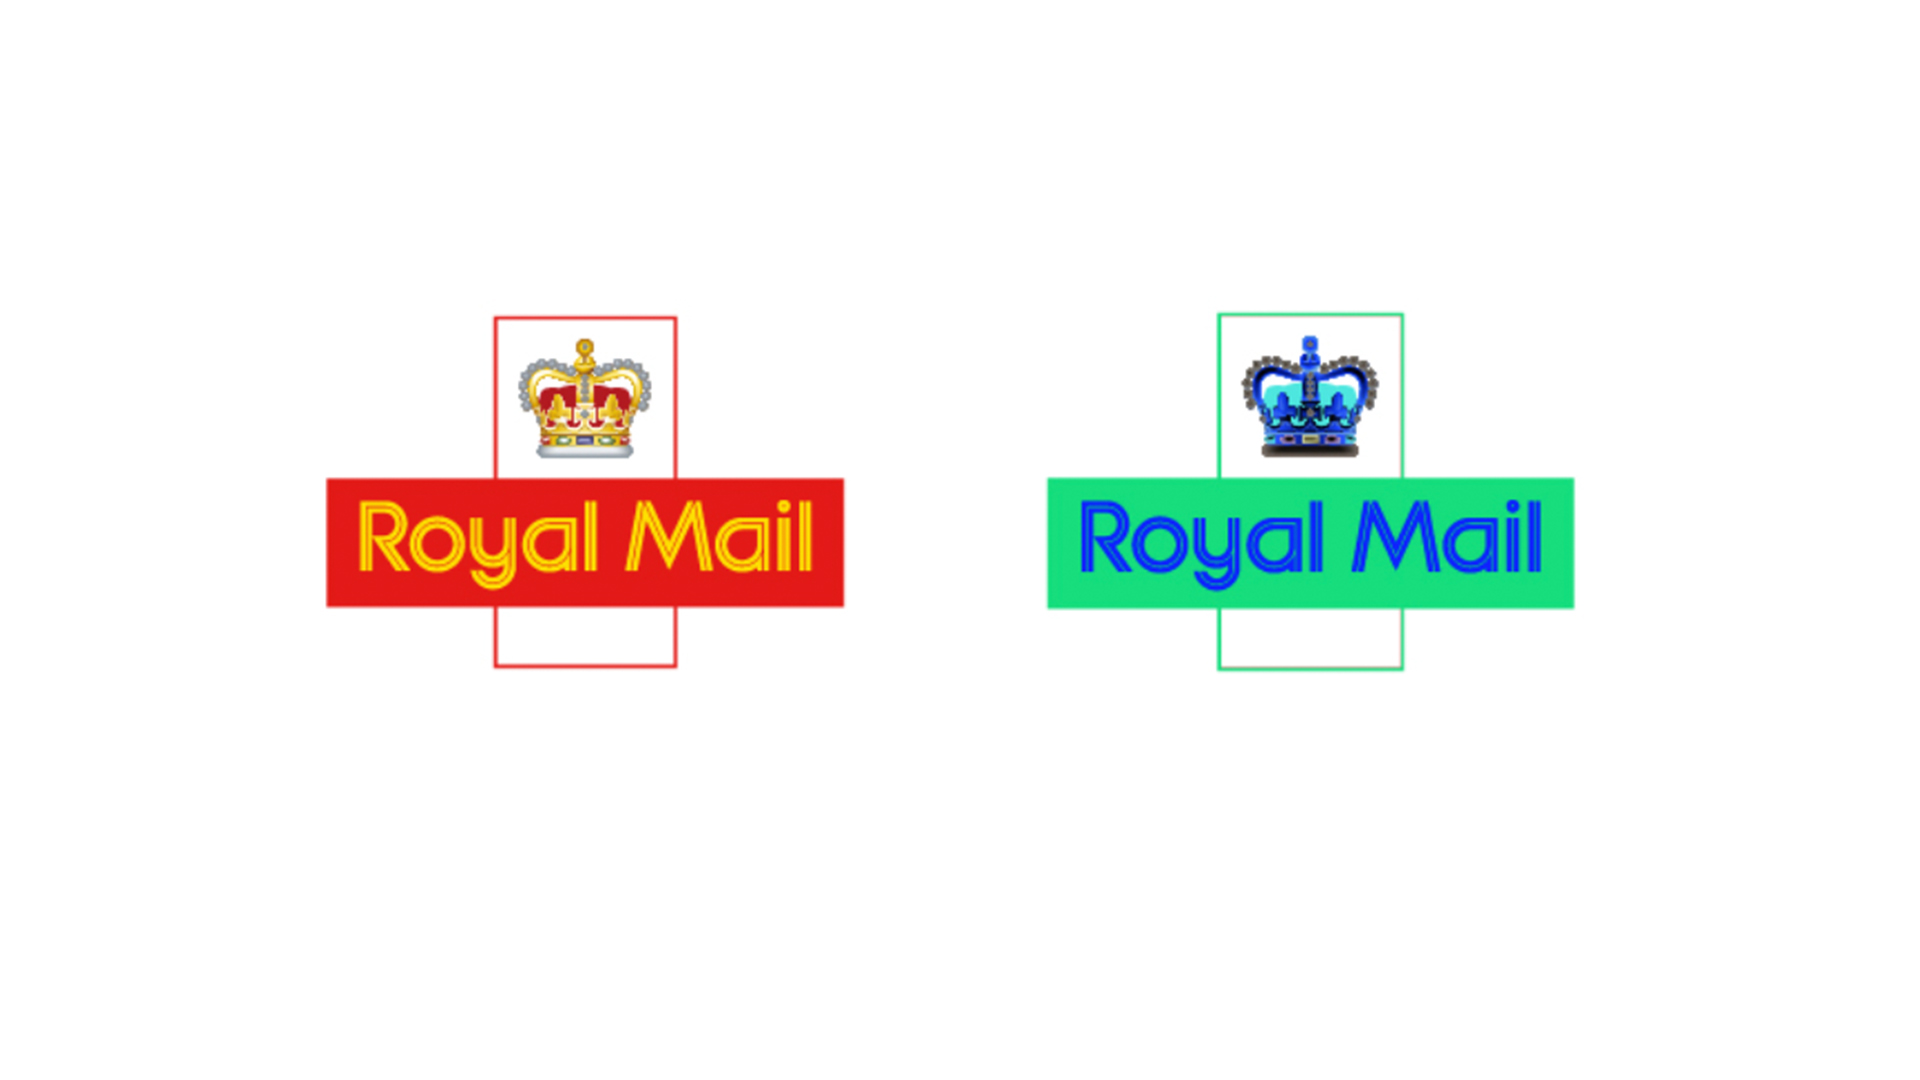 Royal Mail logo in red and gold and blue and green.